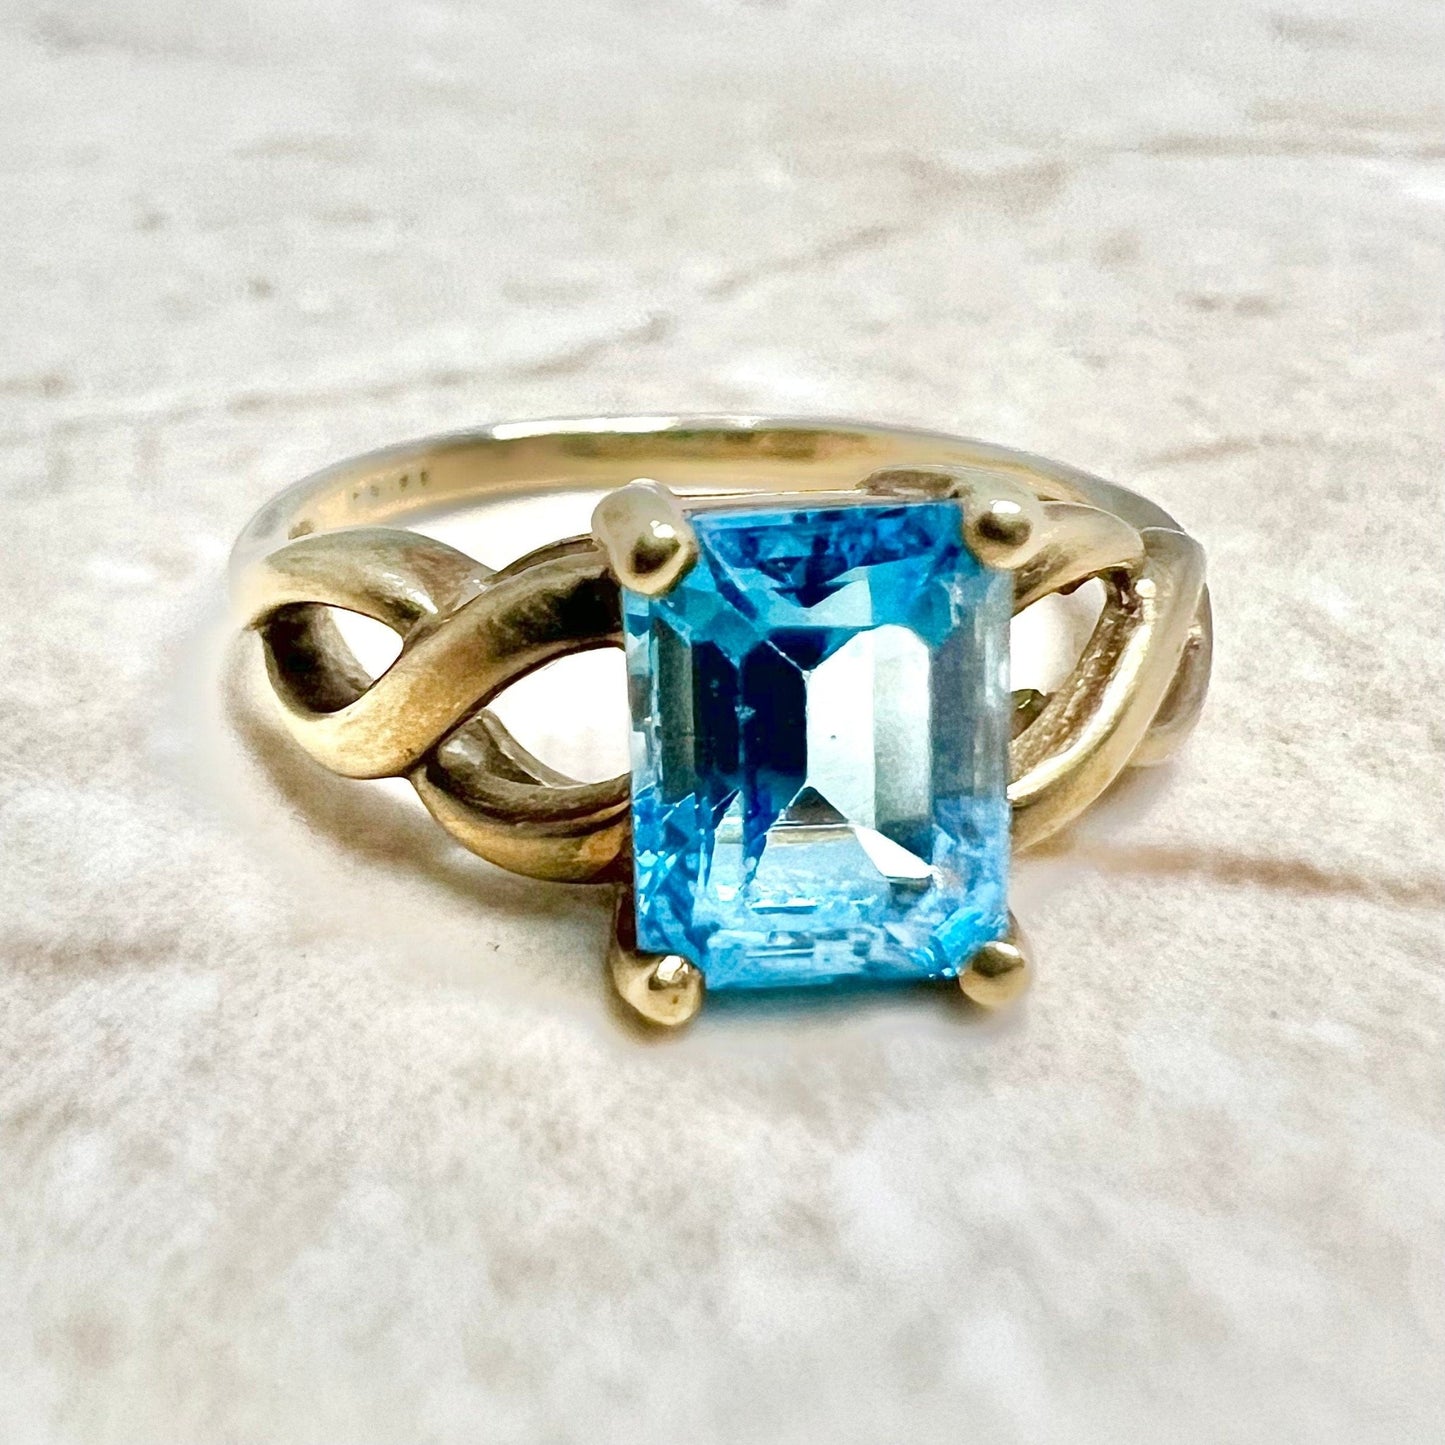 10K Swiss Blue Topaz Ring - Yellow Gold Blue Topaz Solitaire Ring - Blue Topaz Cocktail Ring - Minimalist Ring - Gold Ring - Gifts For Her